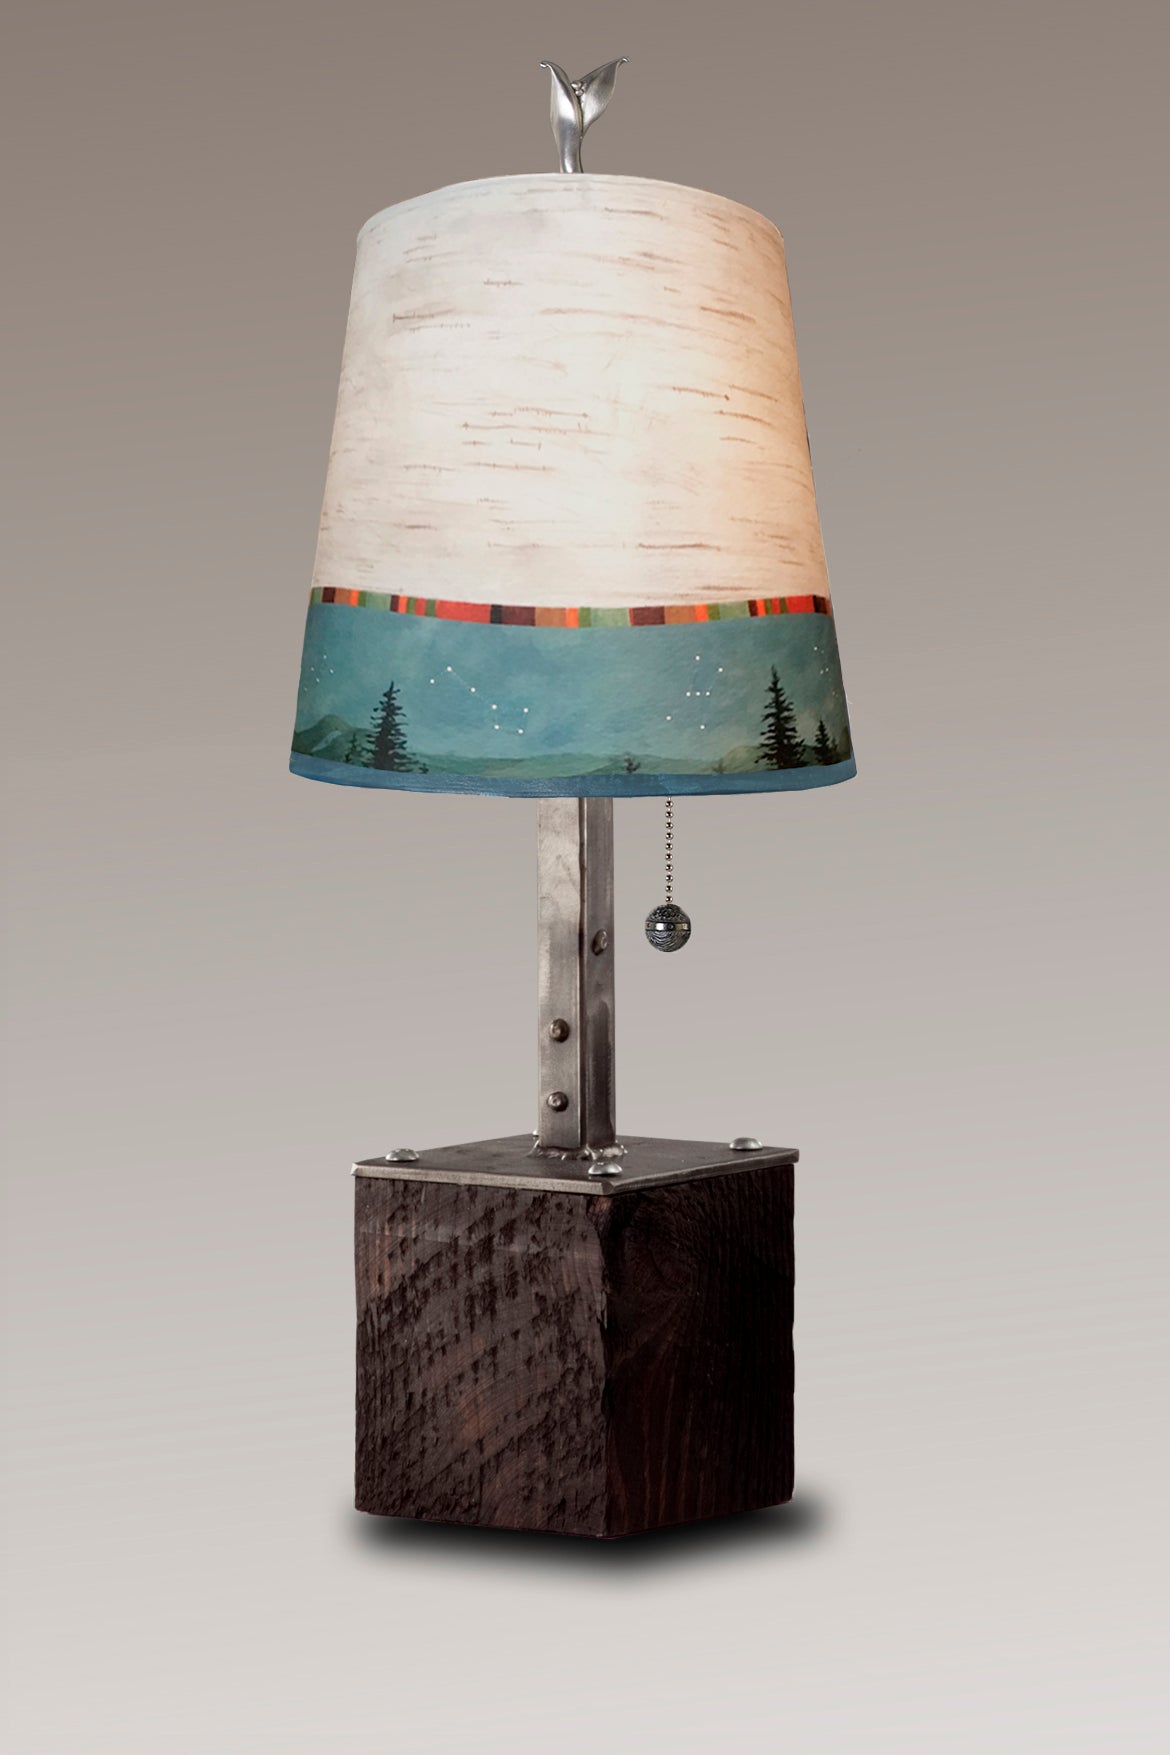 Janna Ugone &amp; Co Table Lamps Steel Table Lamp on Reclaimed Wood with Small Drum Shade in Birch Midnight